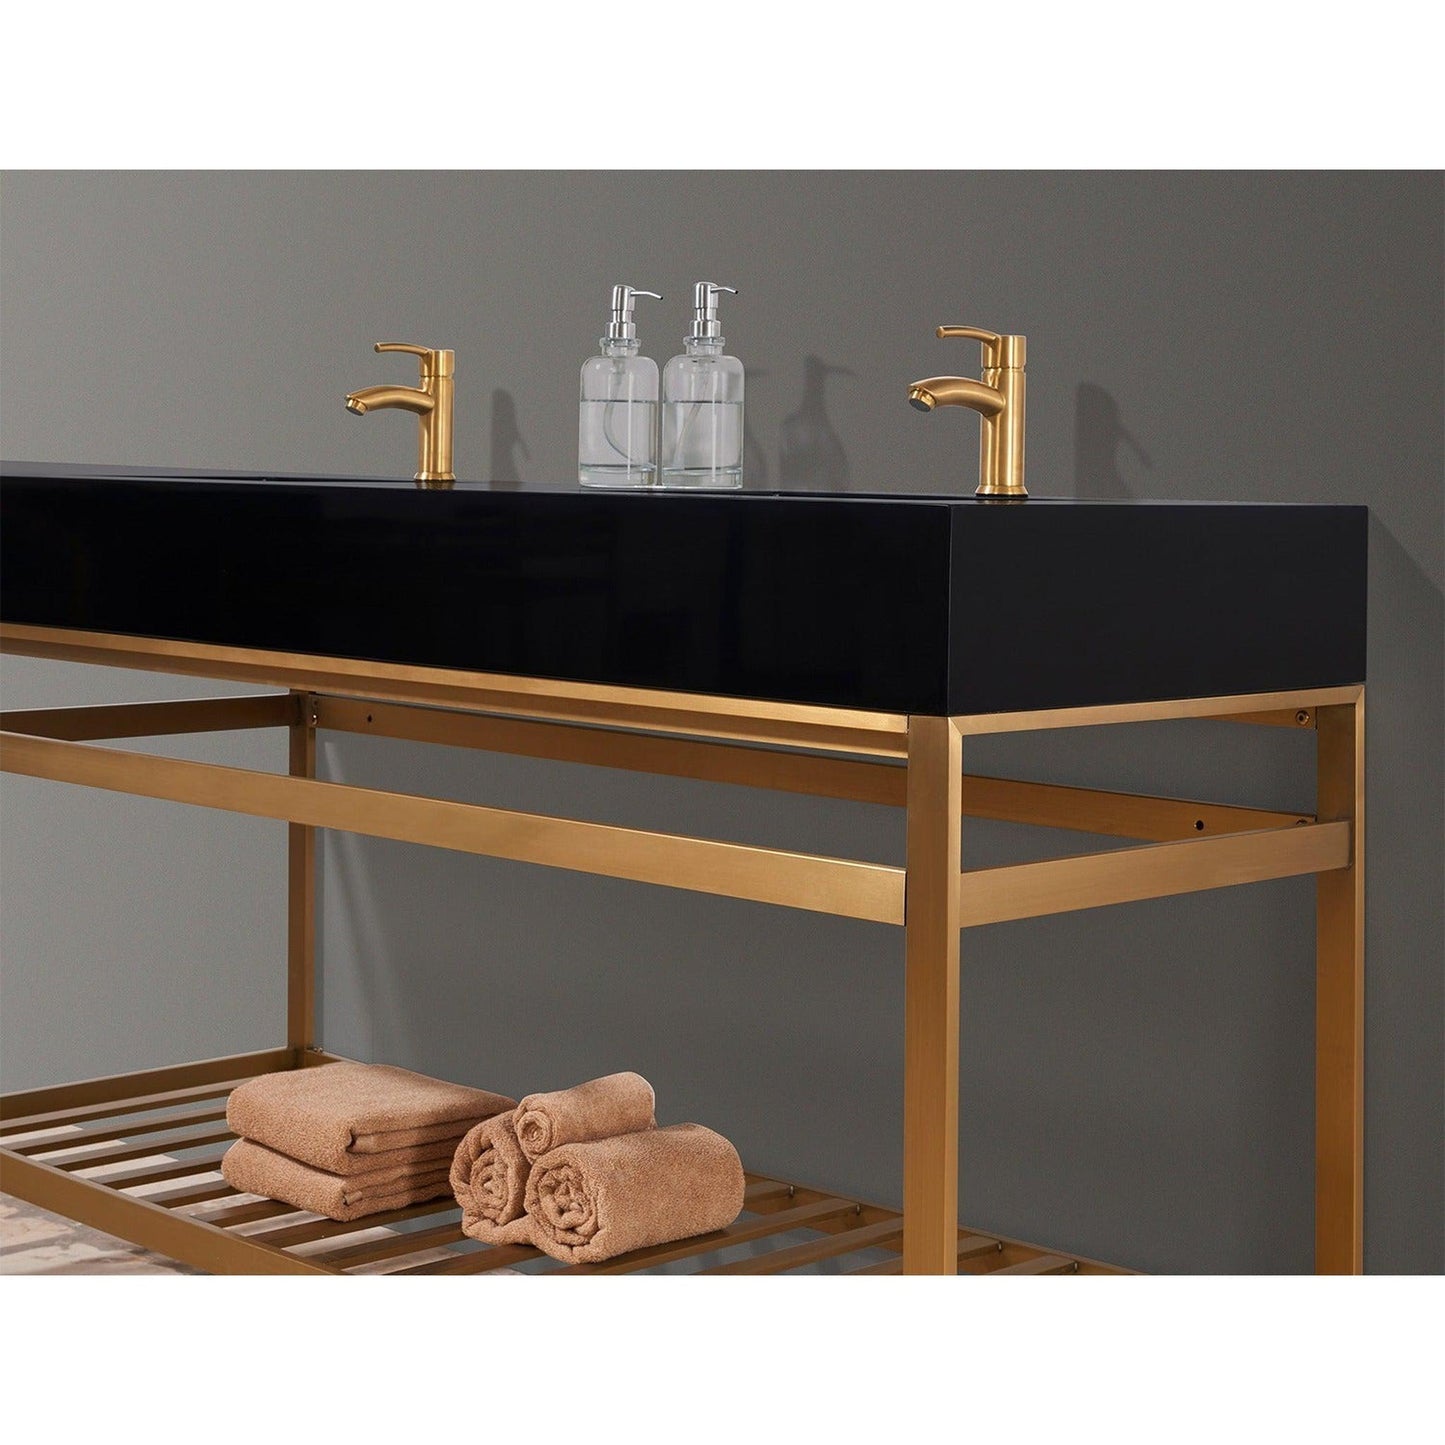 Altair Nauders 60" Brushed Gold Double Stainless Steel Bathroom Vanity Set Console With Mirror, Imperial Black Stone Top, Two Rectangular Undermount Ceramic Sinks, and Safety Overflow Hole